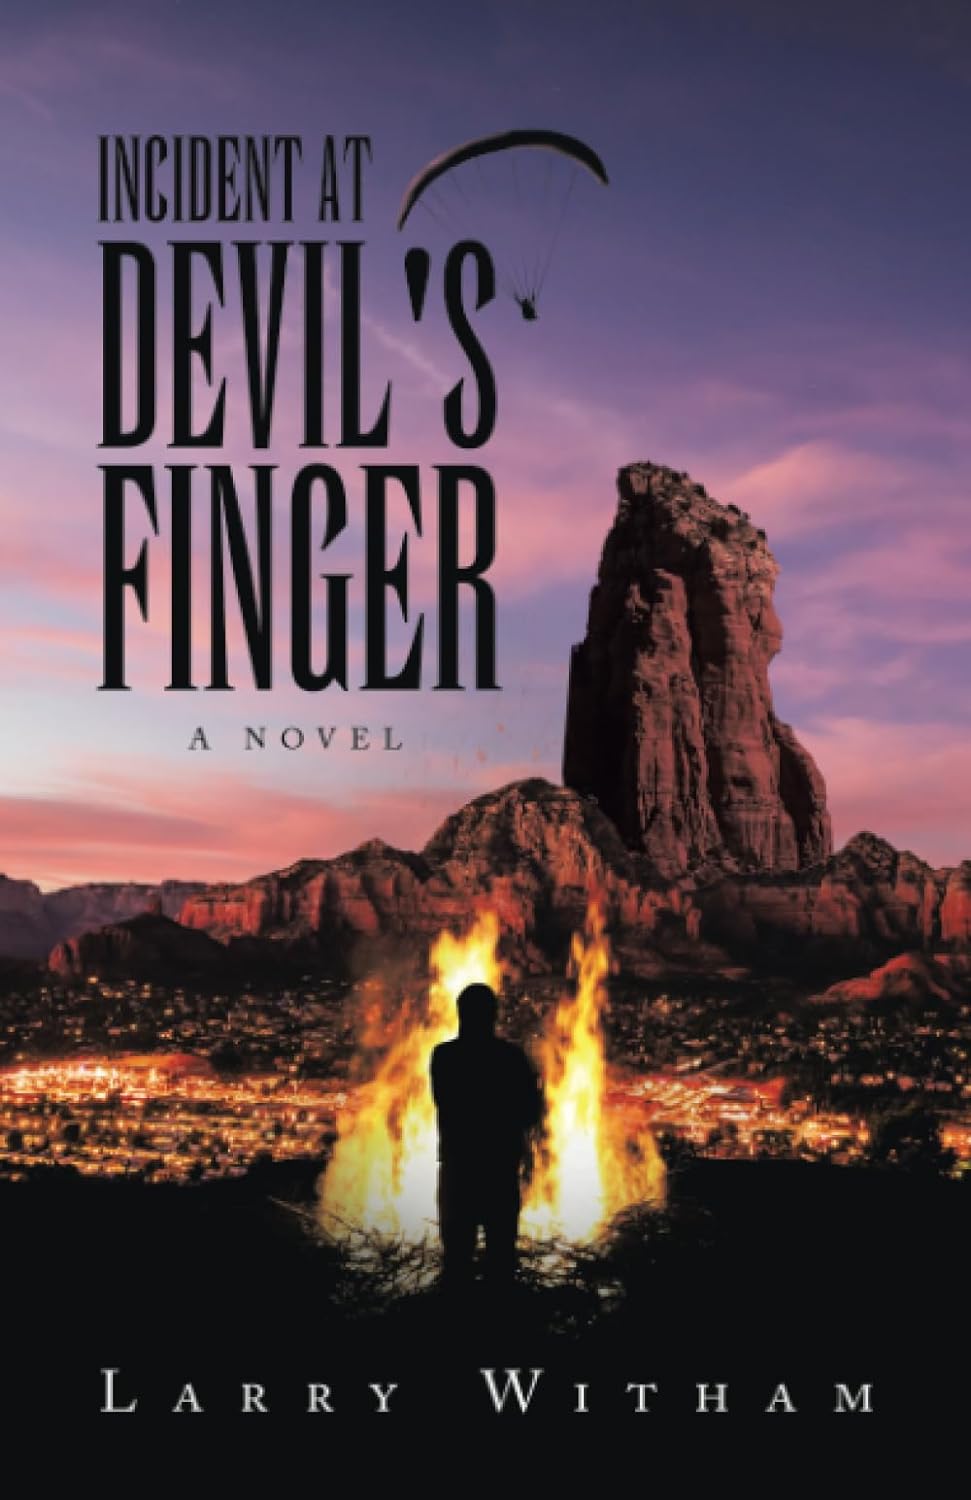 Incident at Devil's Finger by Larry Witham